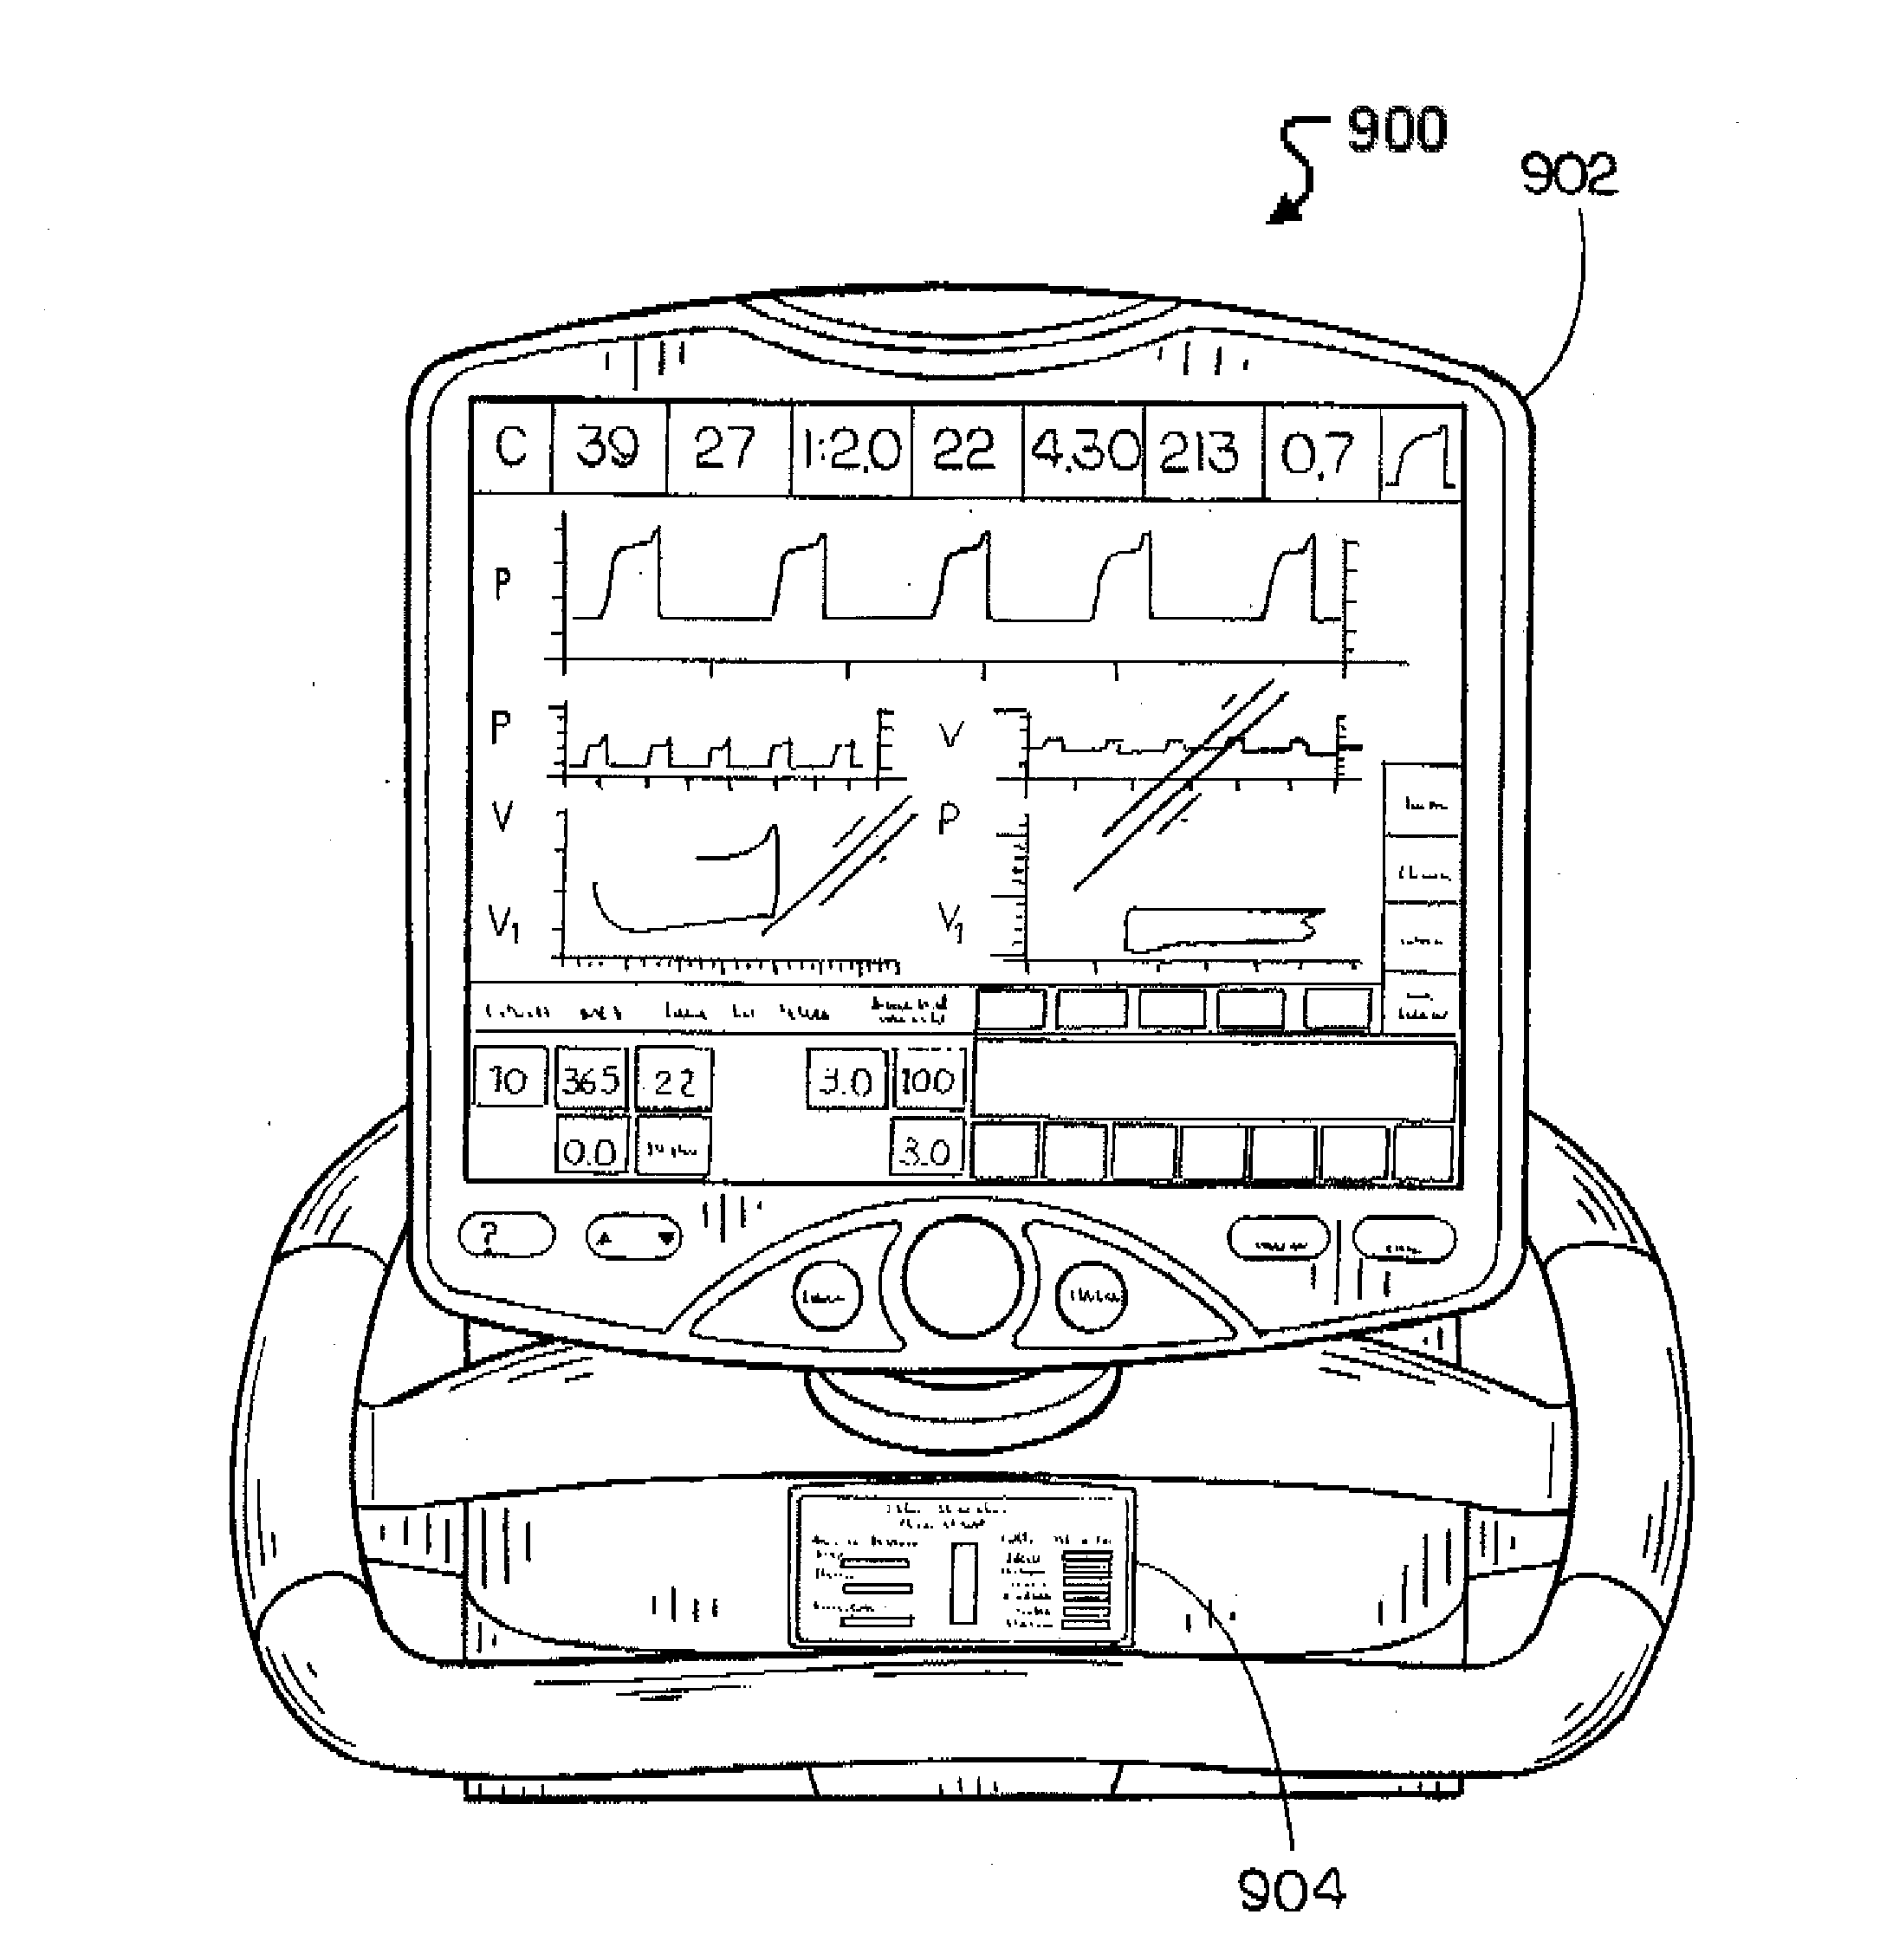 Ventilation System With System Status Display